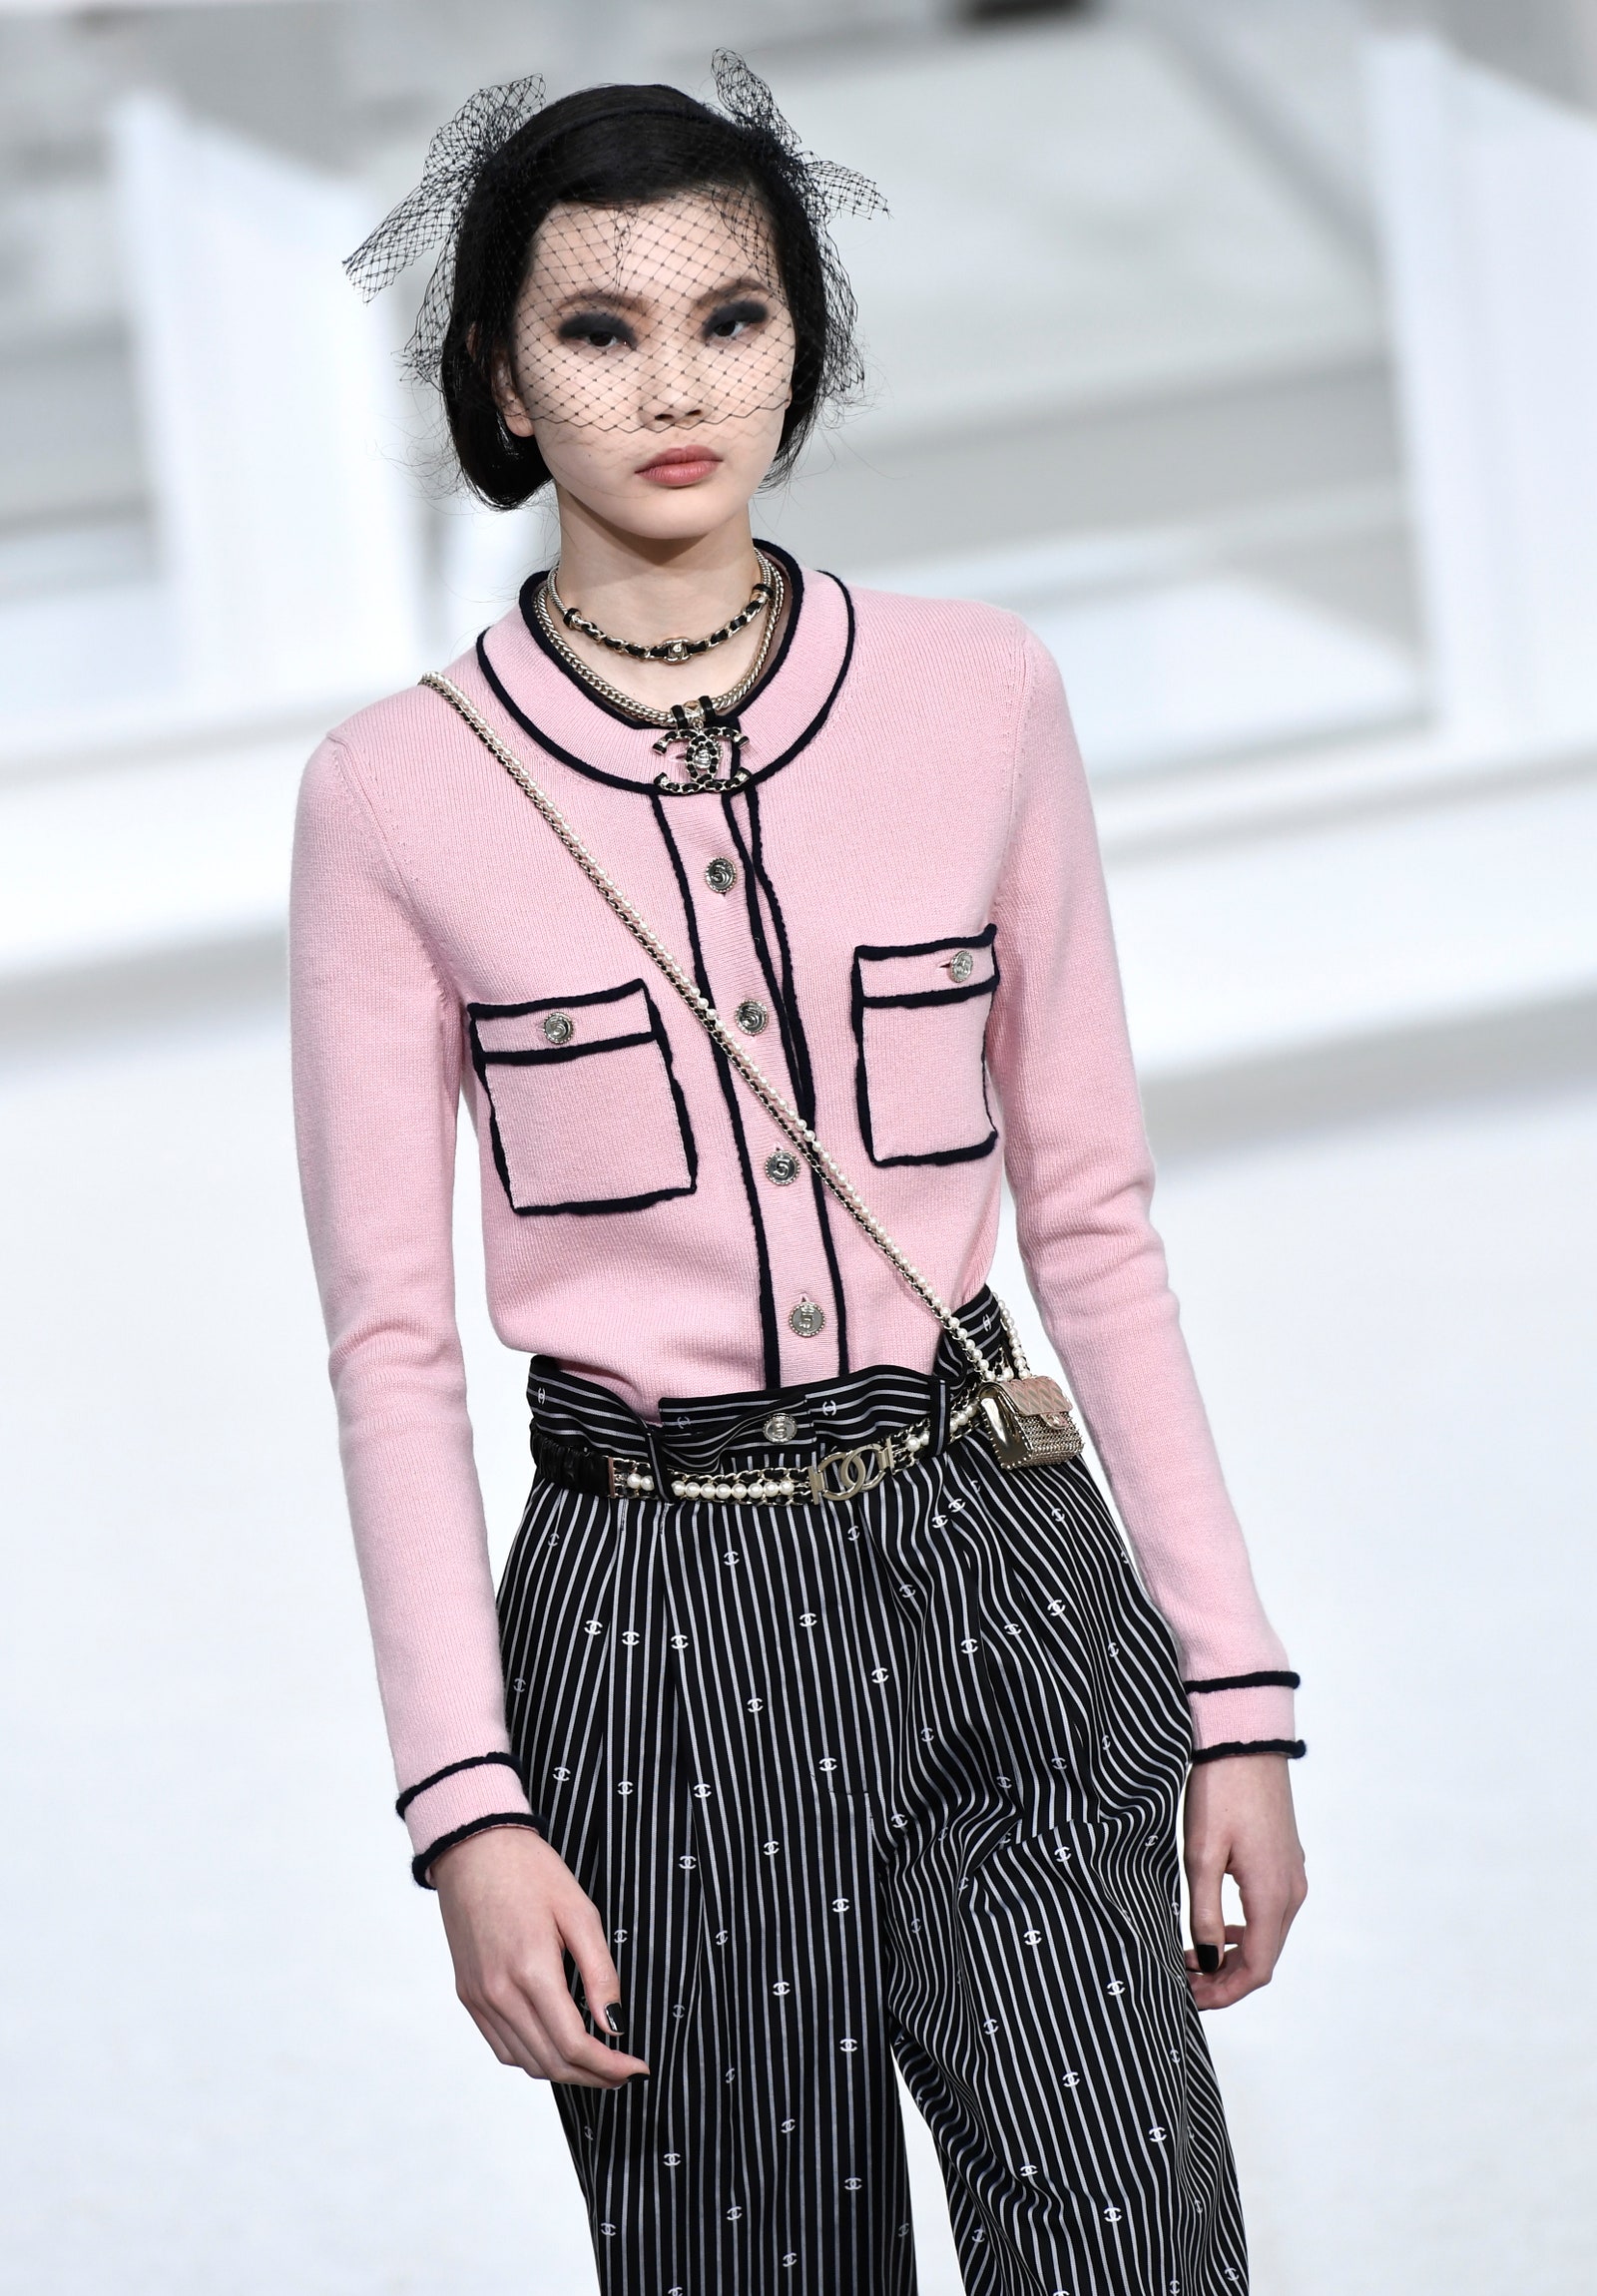 Chanel's ss21